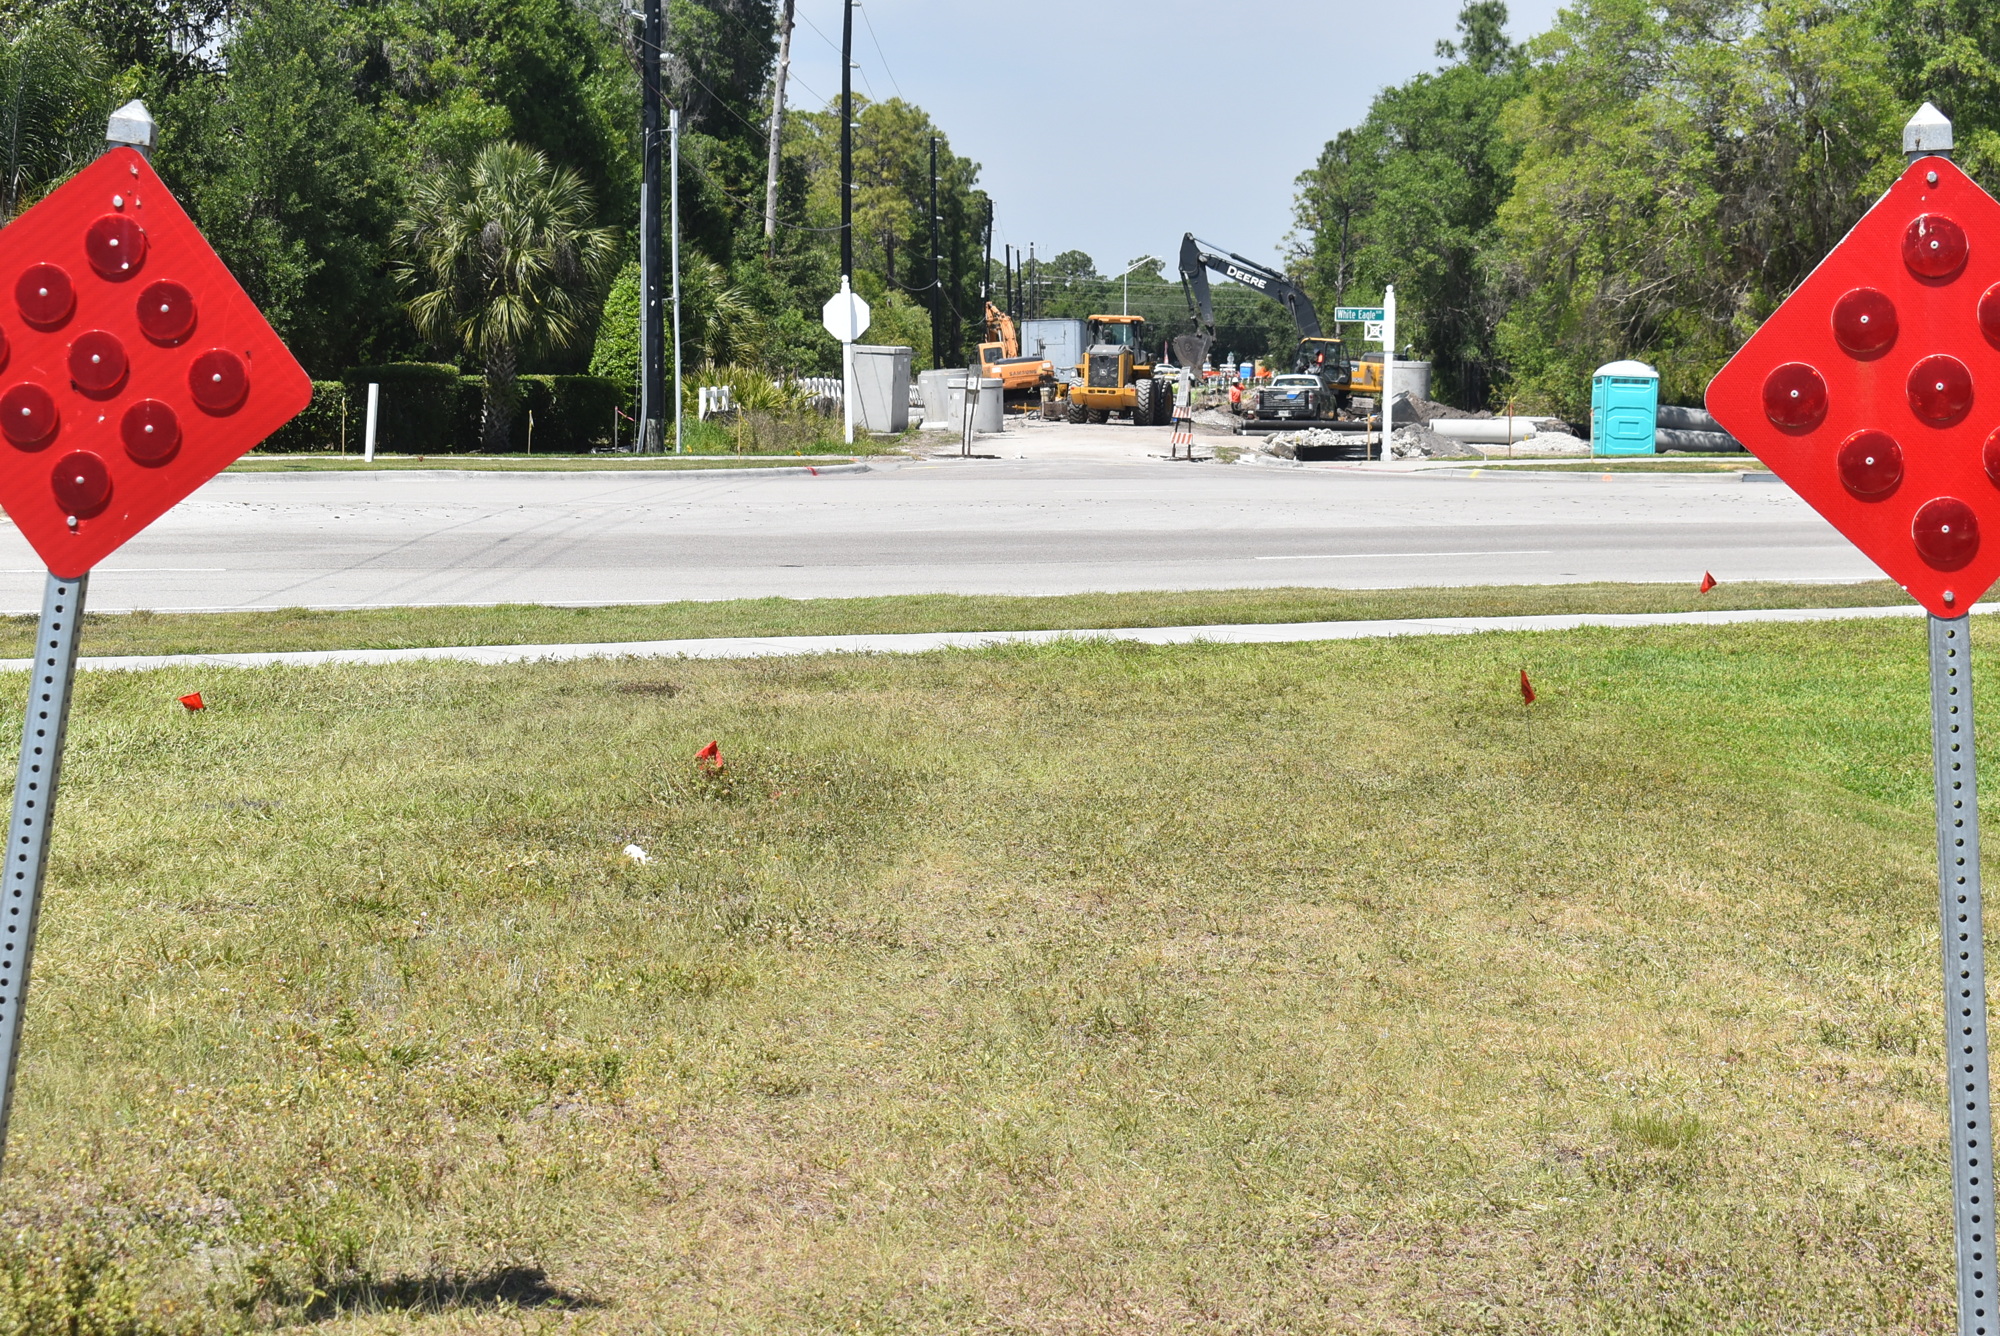 Seen across White Eagle Boulevard, construction on improvements to Pope Road is underway. Construction is focused on a quarter-mile stretch of Pope Road from White Eagle Boulevard to State Road 64.